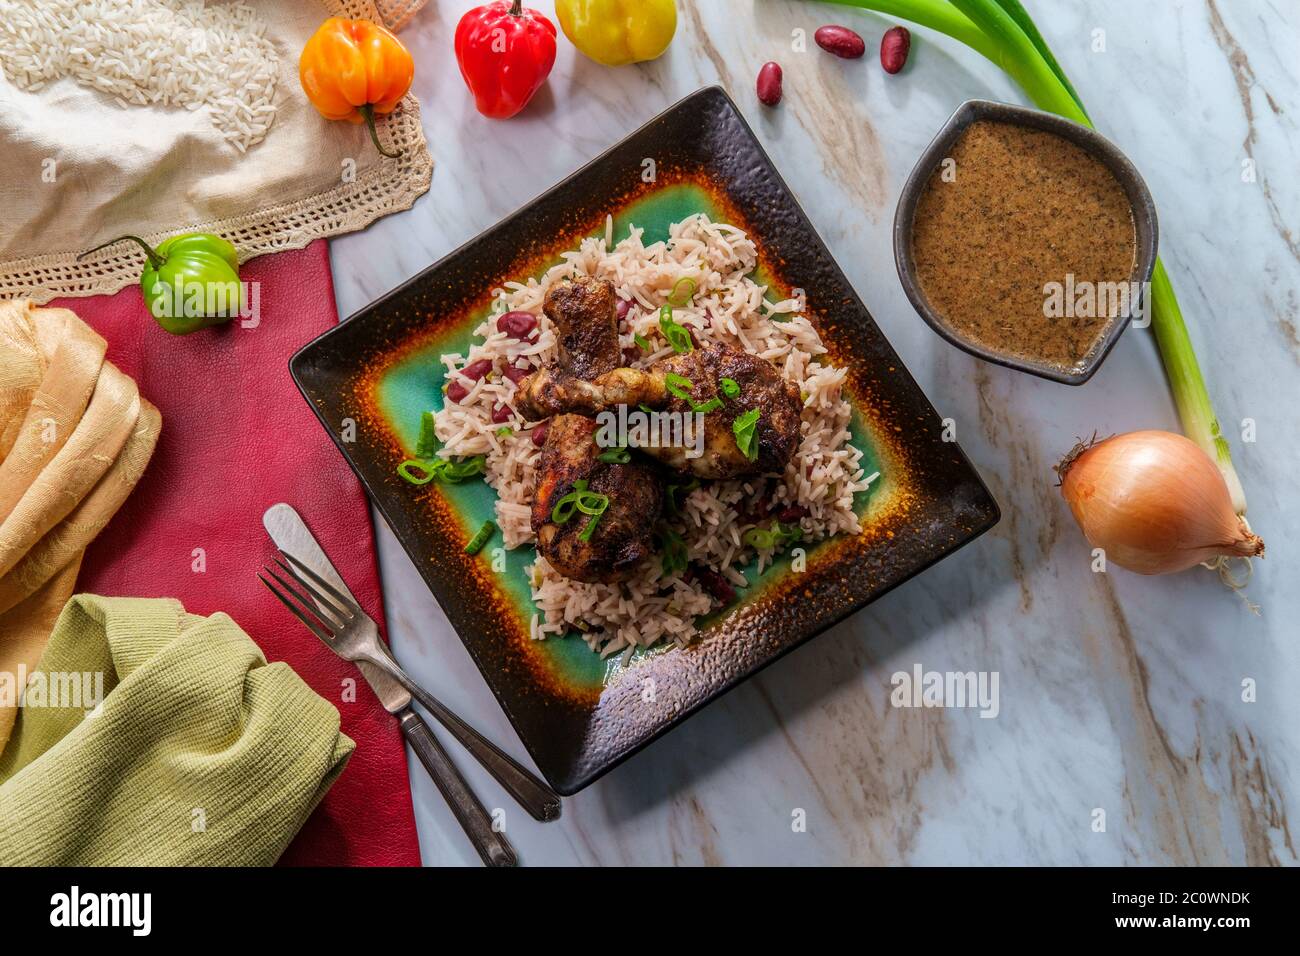 Authentic Spicy Jamaican Jerk Chicken Legs With Scotch Bonnet Chili Peppers Served With Coconut Rice And Peas Stock Photo Alamy